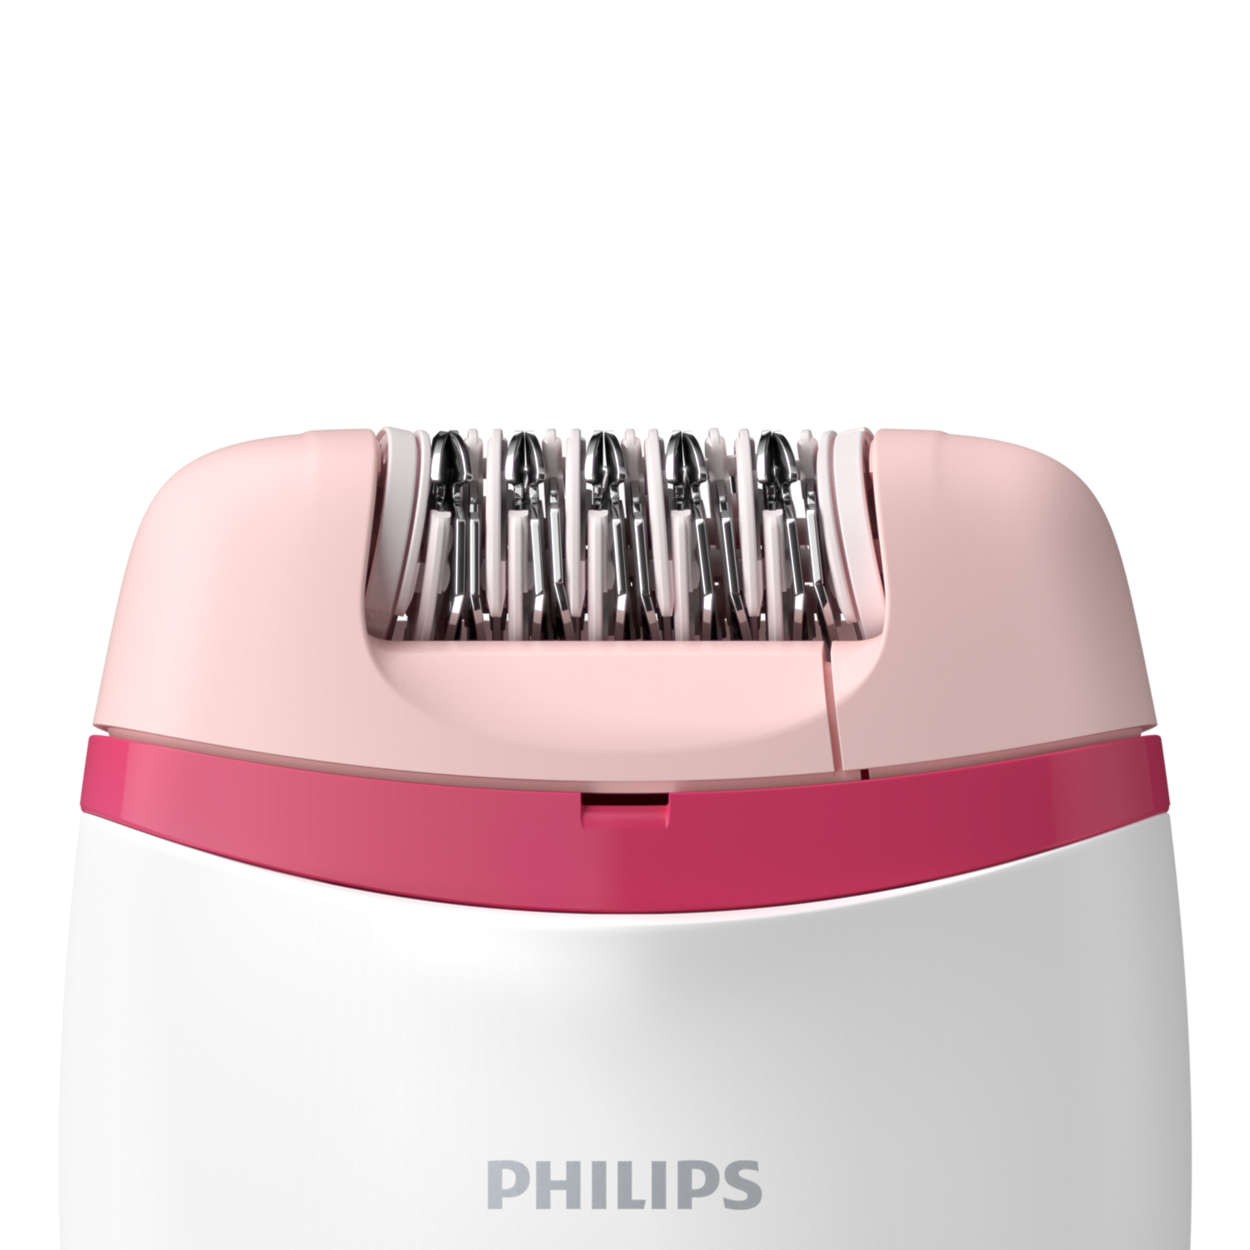 Philips BRE235/00 (Corded Compact Epilator for gentle hair removal)